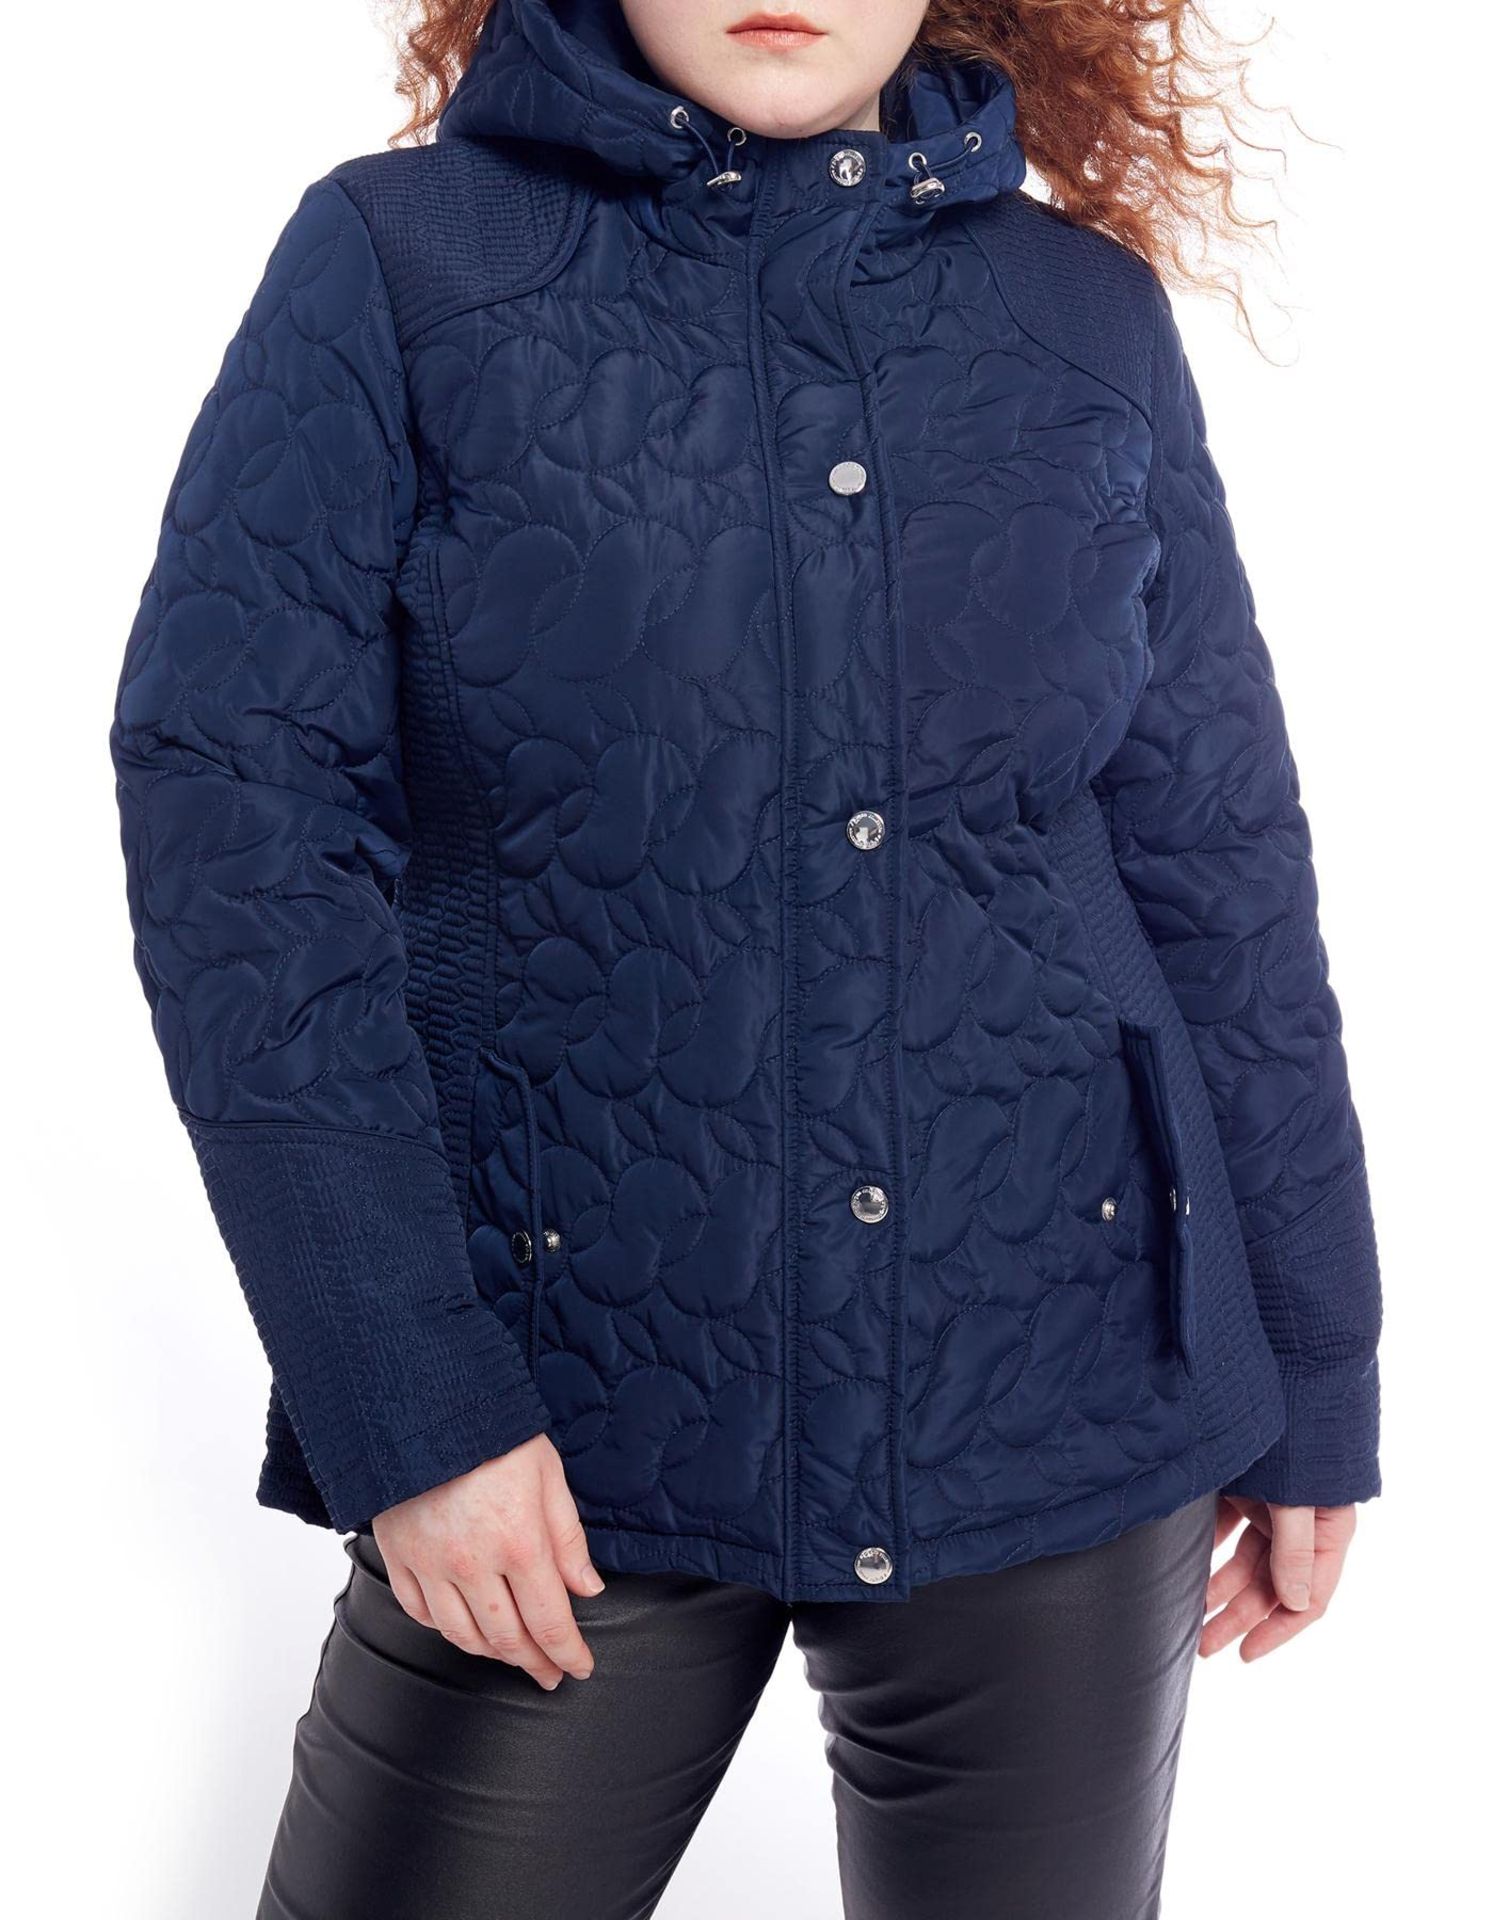 RRP £57.07 S P Y M Womens Diamond Quilted Jacket Lightweight Padding Coat with Pockets